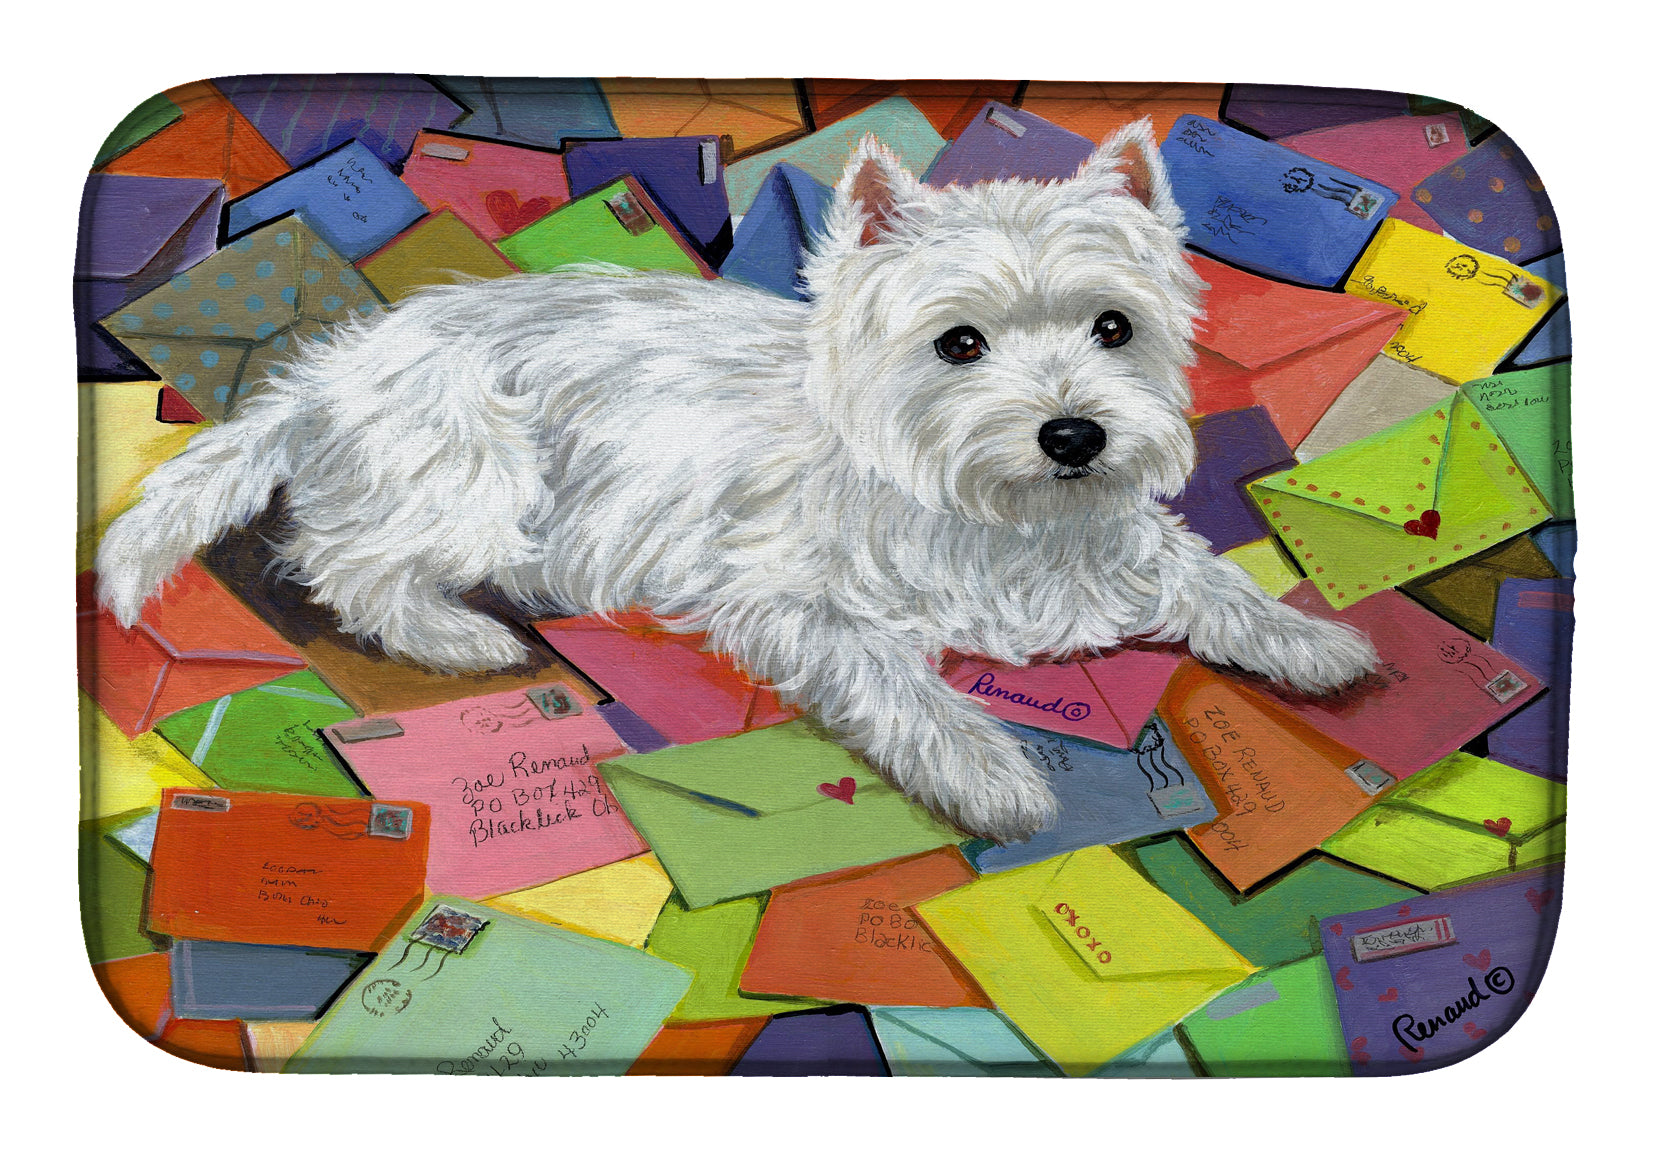 Westie Zoe's Mail Dish Drying Mat PPP3289DDM